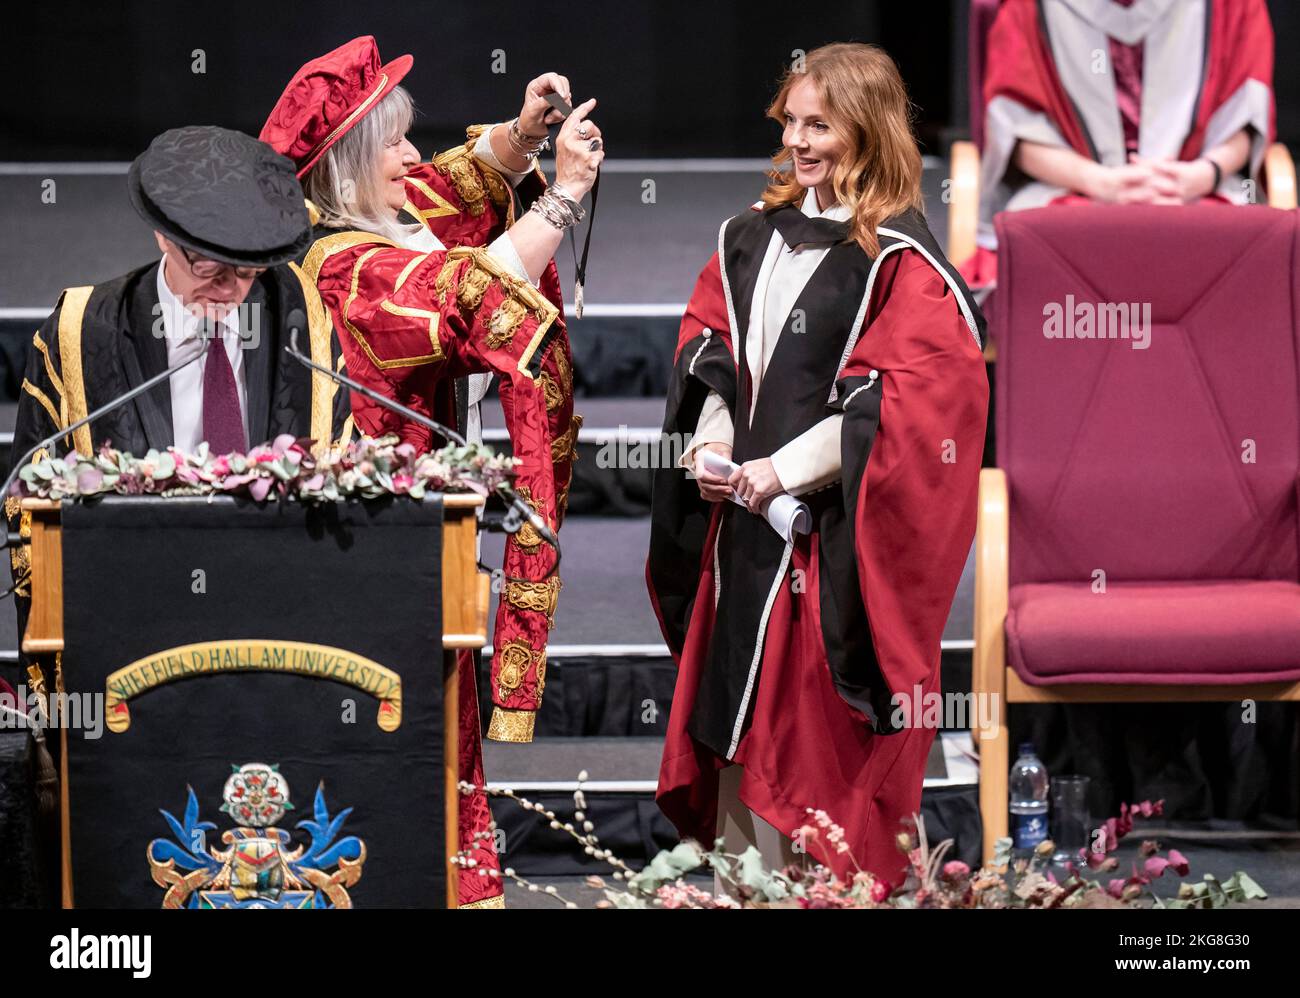 Chancellor of Sheffield Hallam University Baroness Helena Kennedy (second left) presents Geri Halliwell-Horner (right) with an honorary doctorate from Sheffield Hallam University at Ponds Forge International Sports Centre in Sheffield. Picture date: Tuesday November 22, 2022. Stock Photo